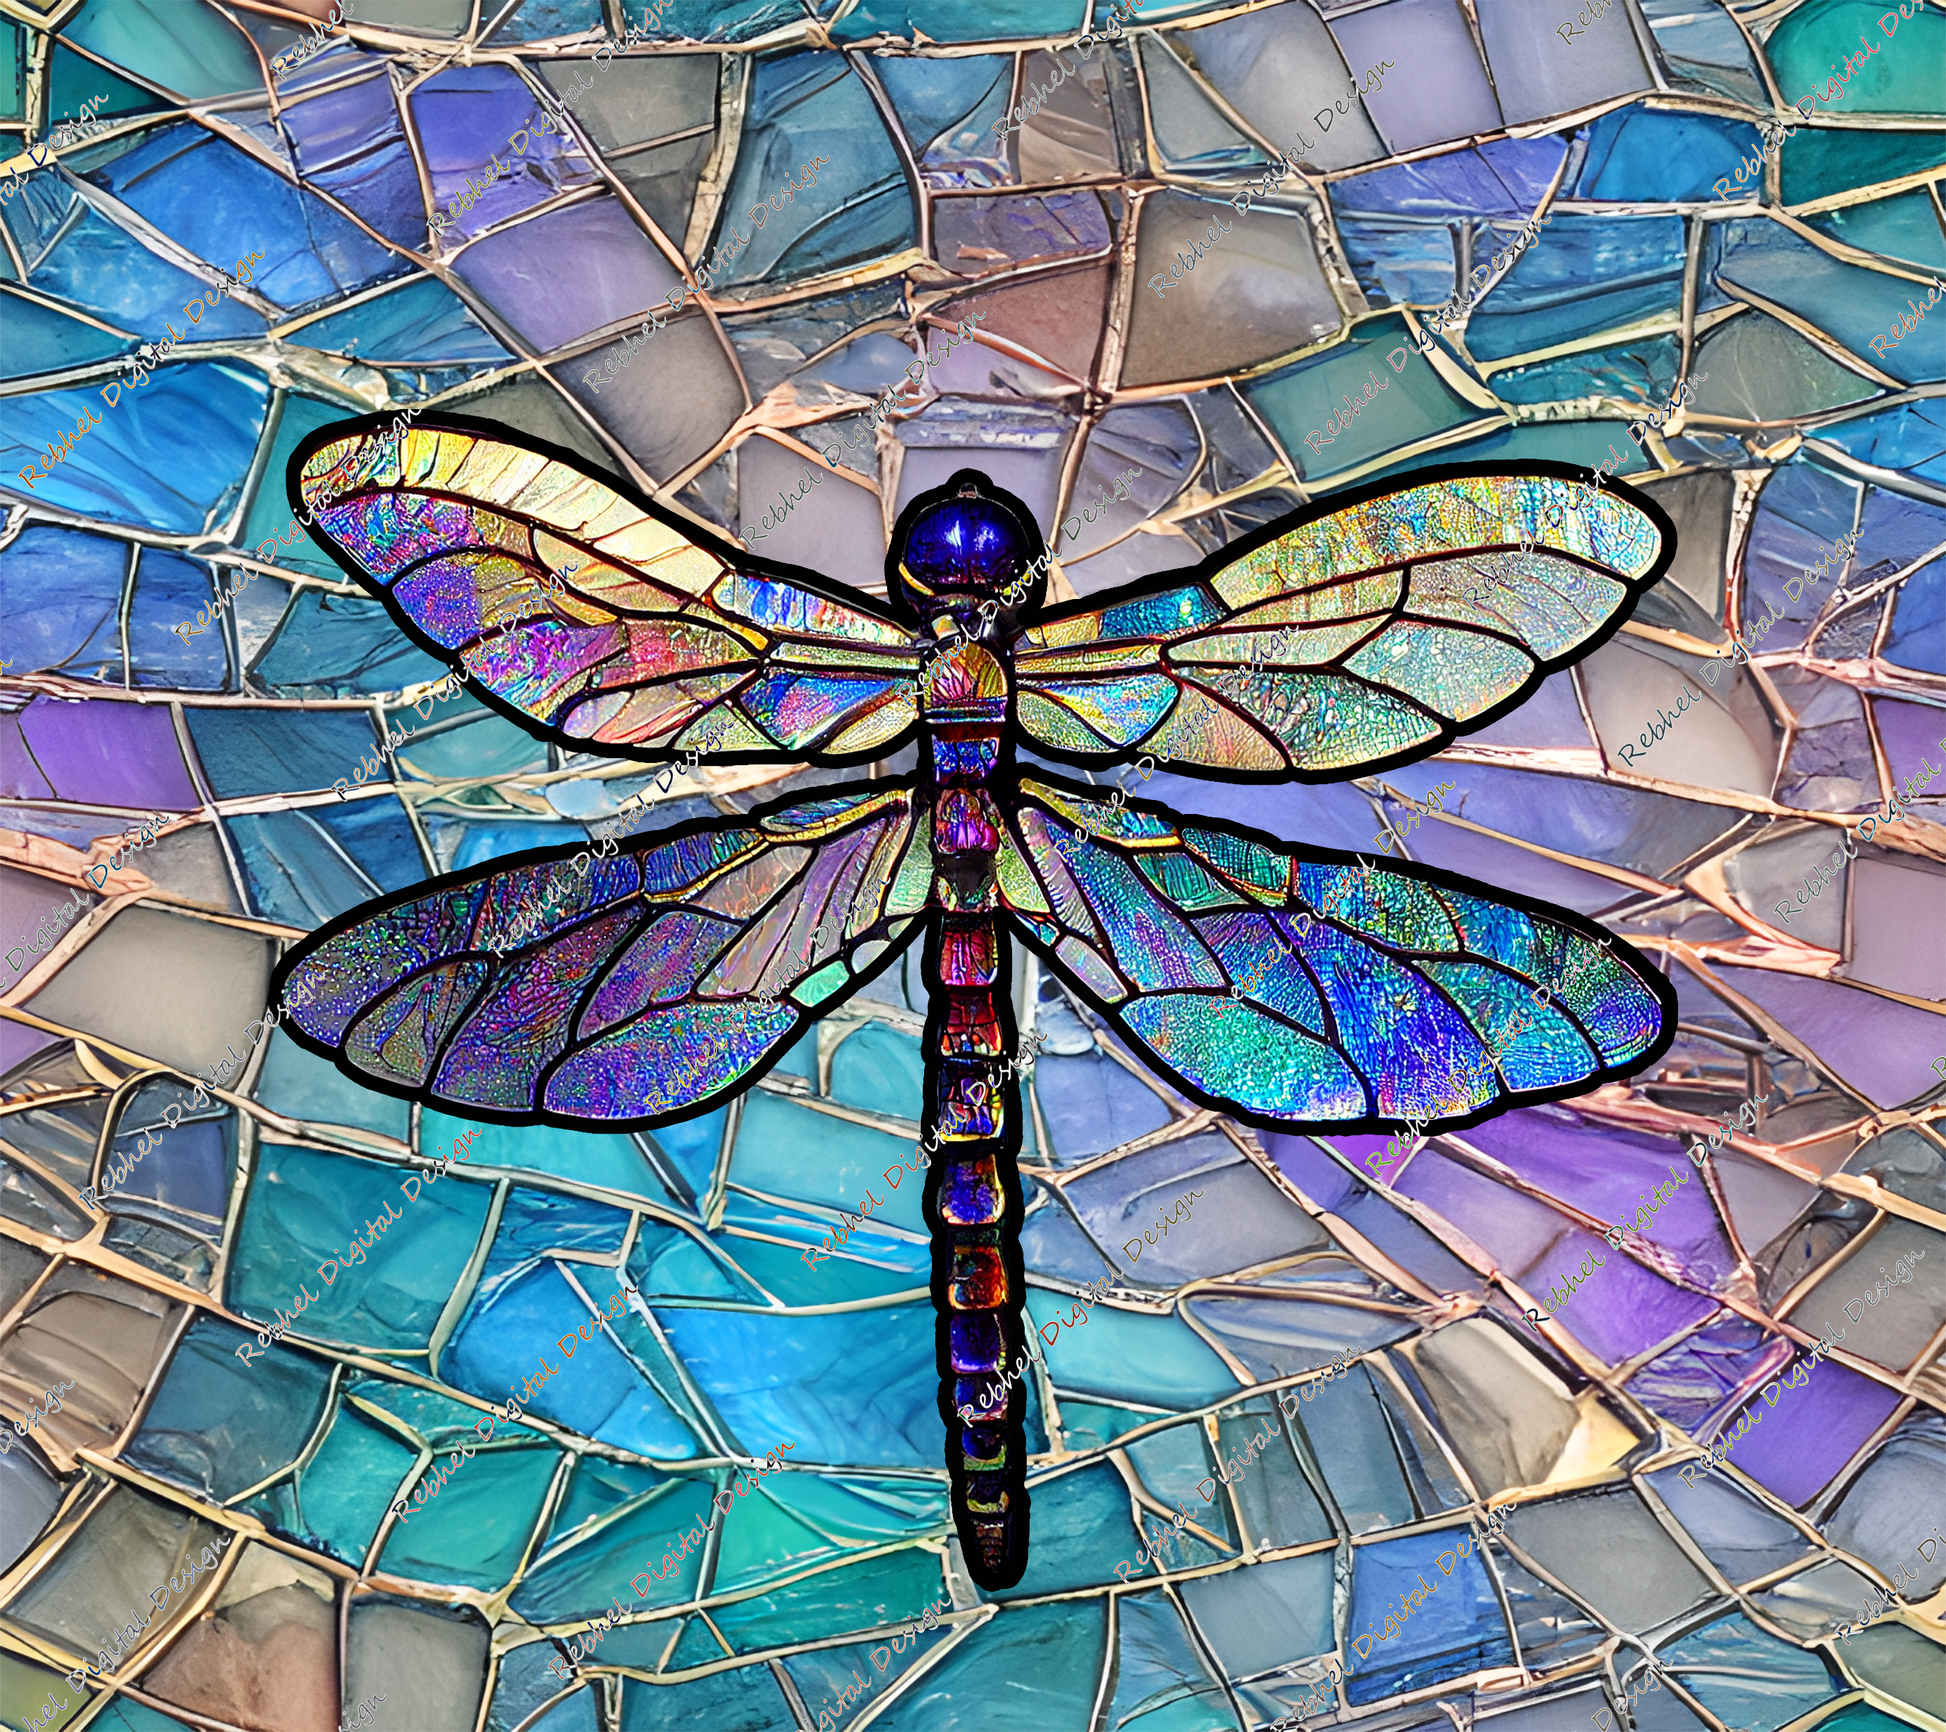 Free Stained Glass Pattern 2319-Dragonfly-P2319